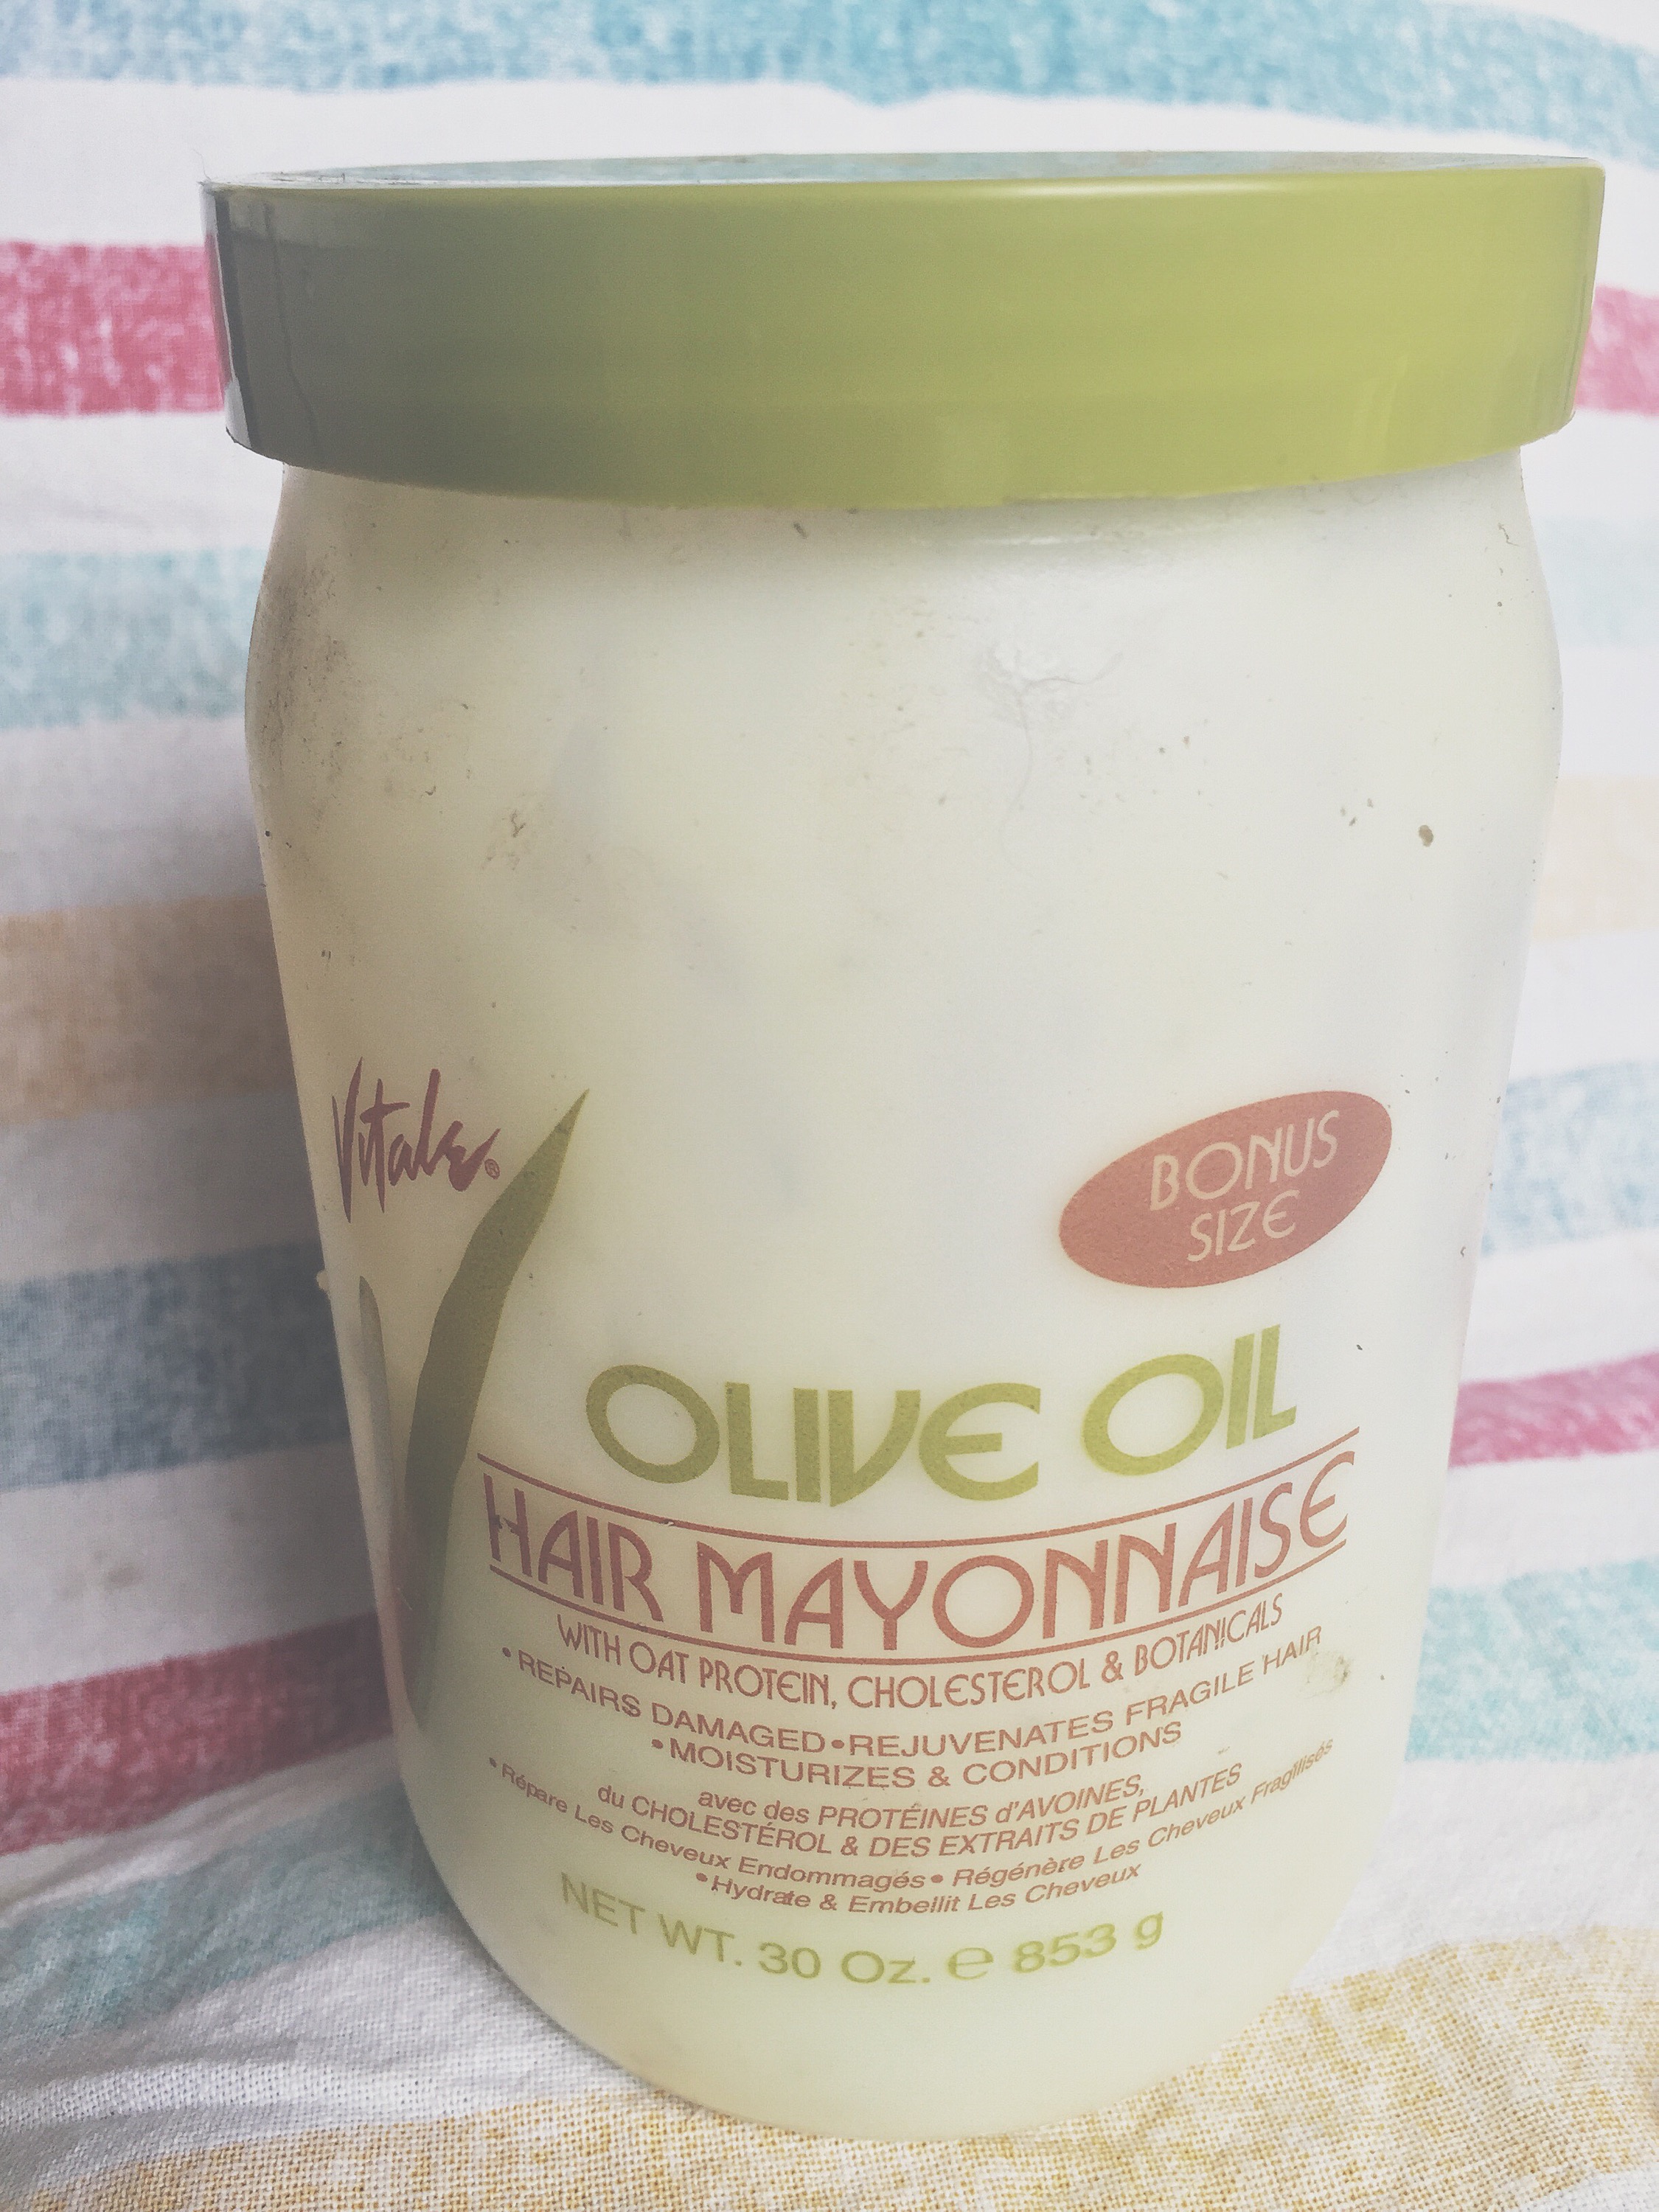 Product review: Vitale Olive Oil Hair Mayonnaise